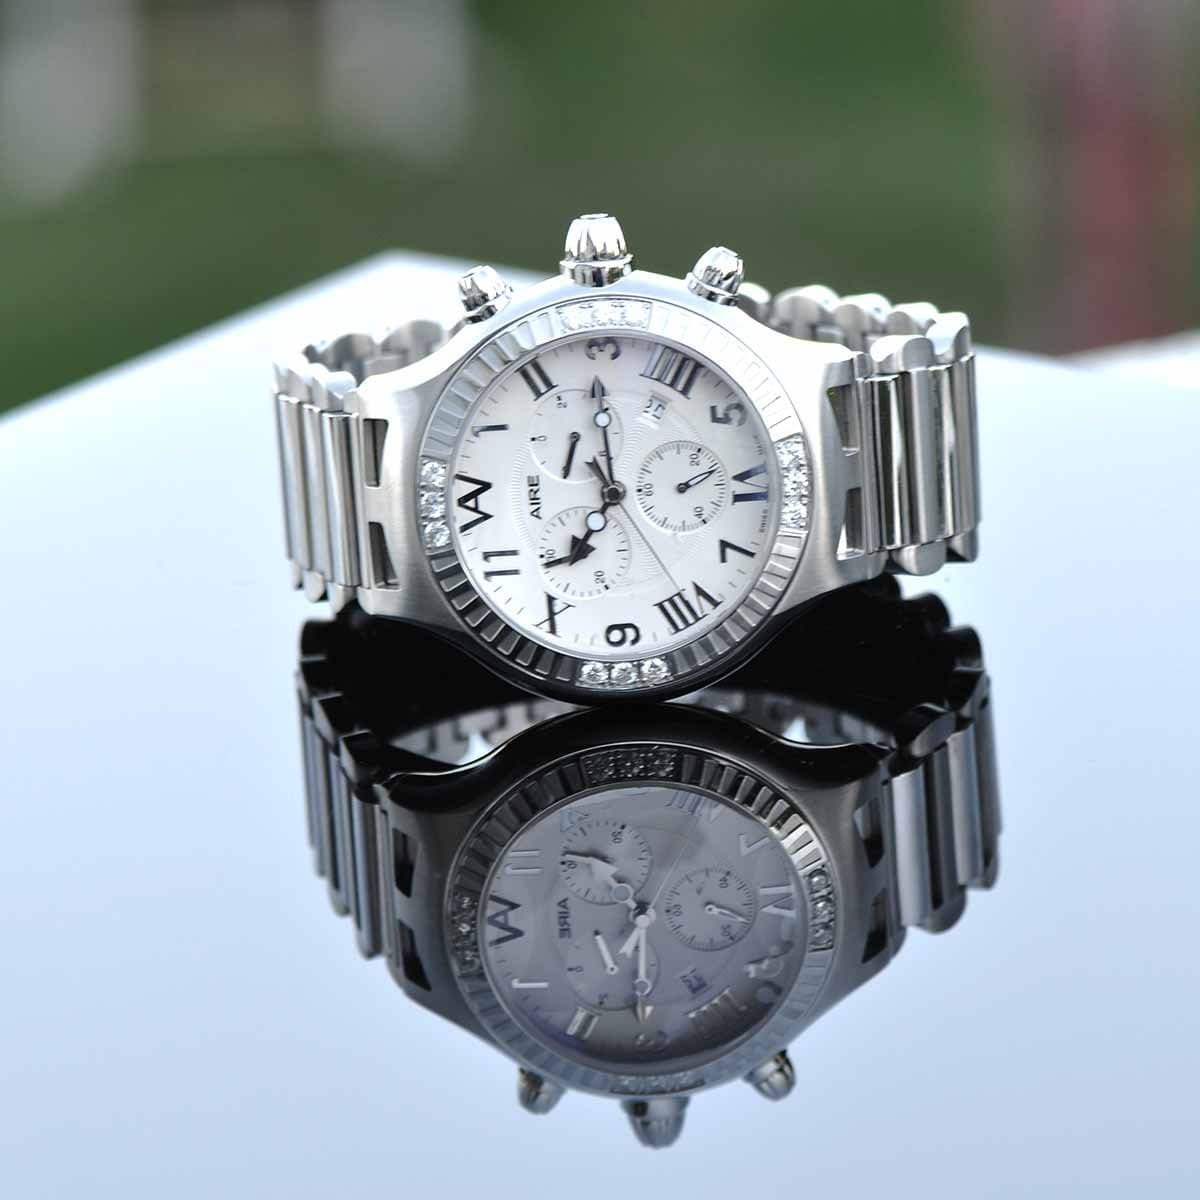 CHRIS AIRE WATCH PARLAY CHRONOGRAPH - Chris Aire Fine Jewelry & Timepieces